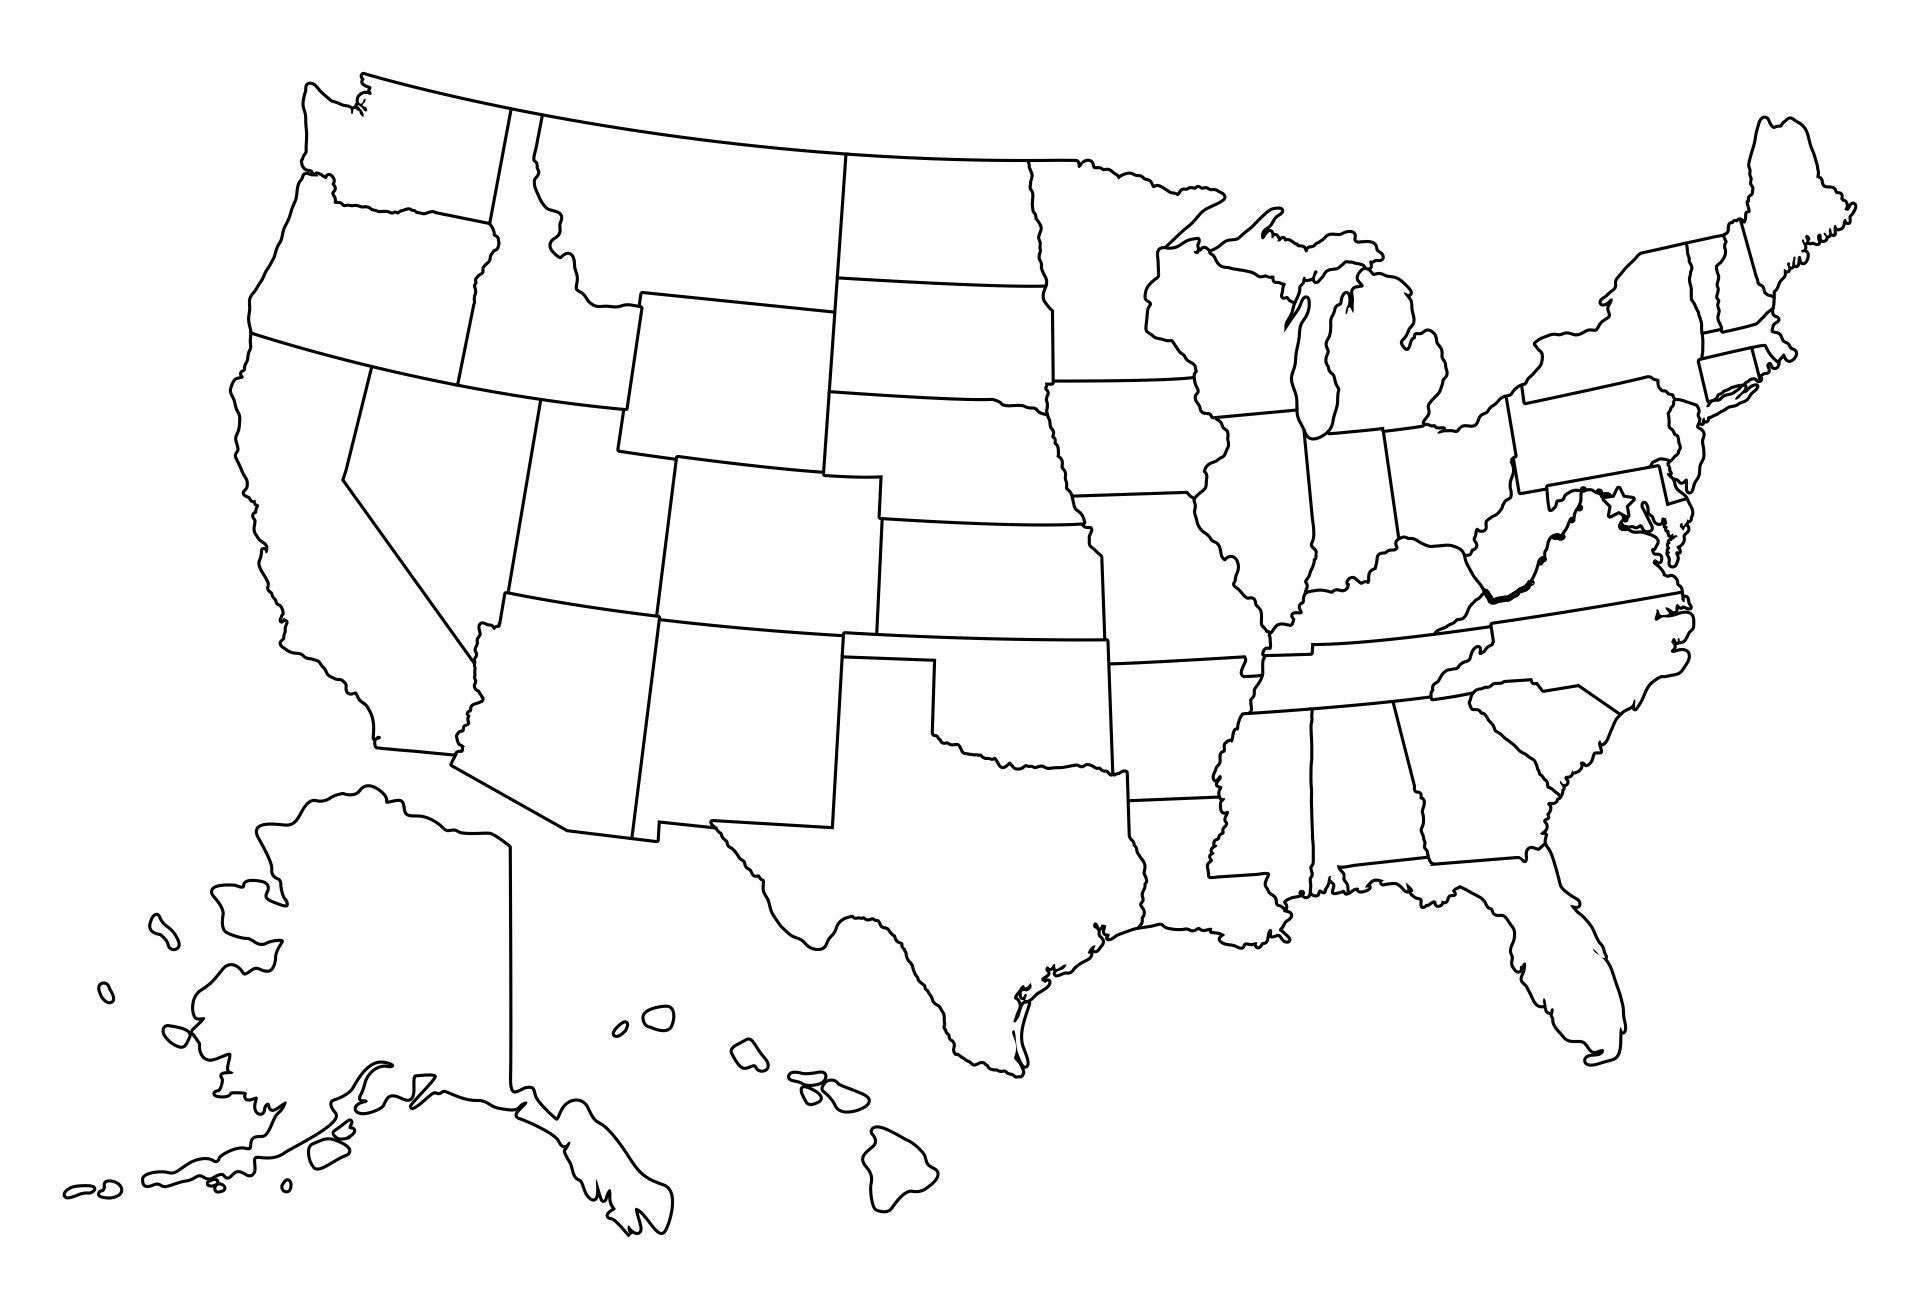 4 Best Images of Printable USA Maps United States Colored - Free